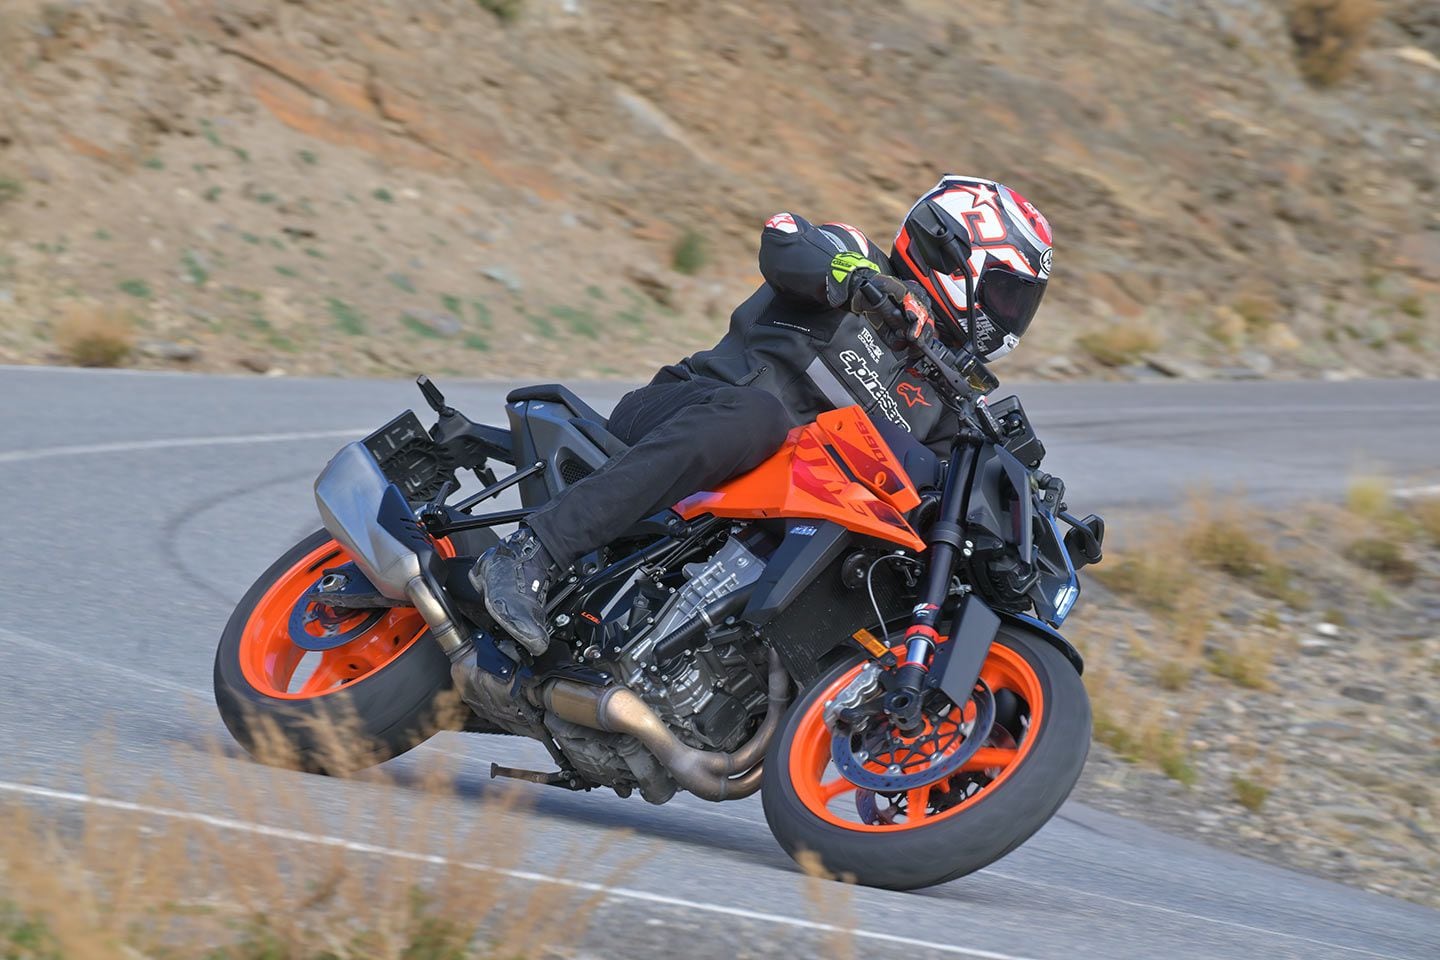 The 990 Duke is not a remake of the 890 Duke R, but an entirely new platform for KTM, who says the bike is 96 percent new compared to the 890.